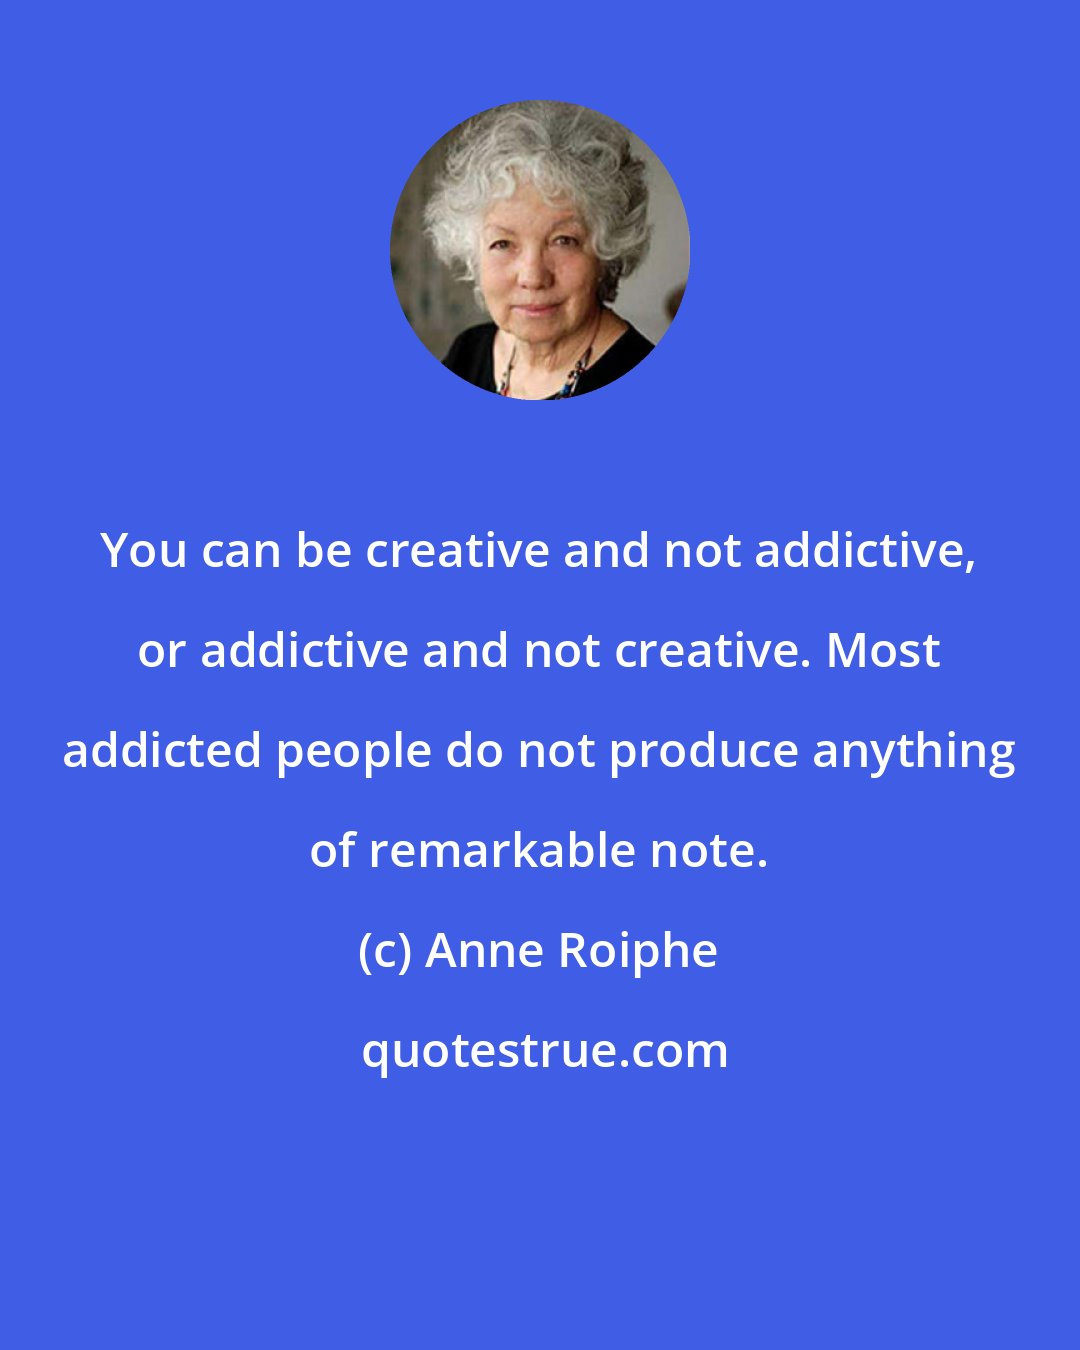 Anne Roiphe: You can be creative and not addictive, or addictive and not creative. Most addicted people do not produce anything of remarkable note.